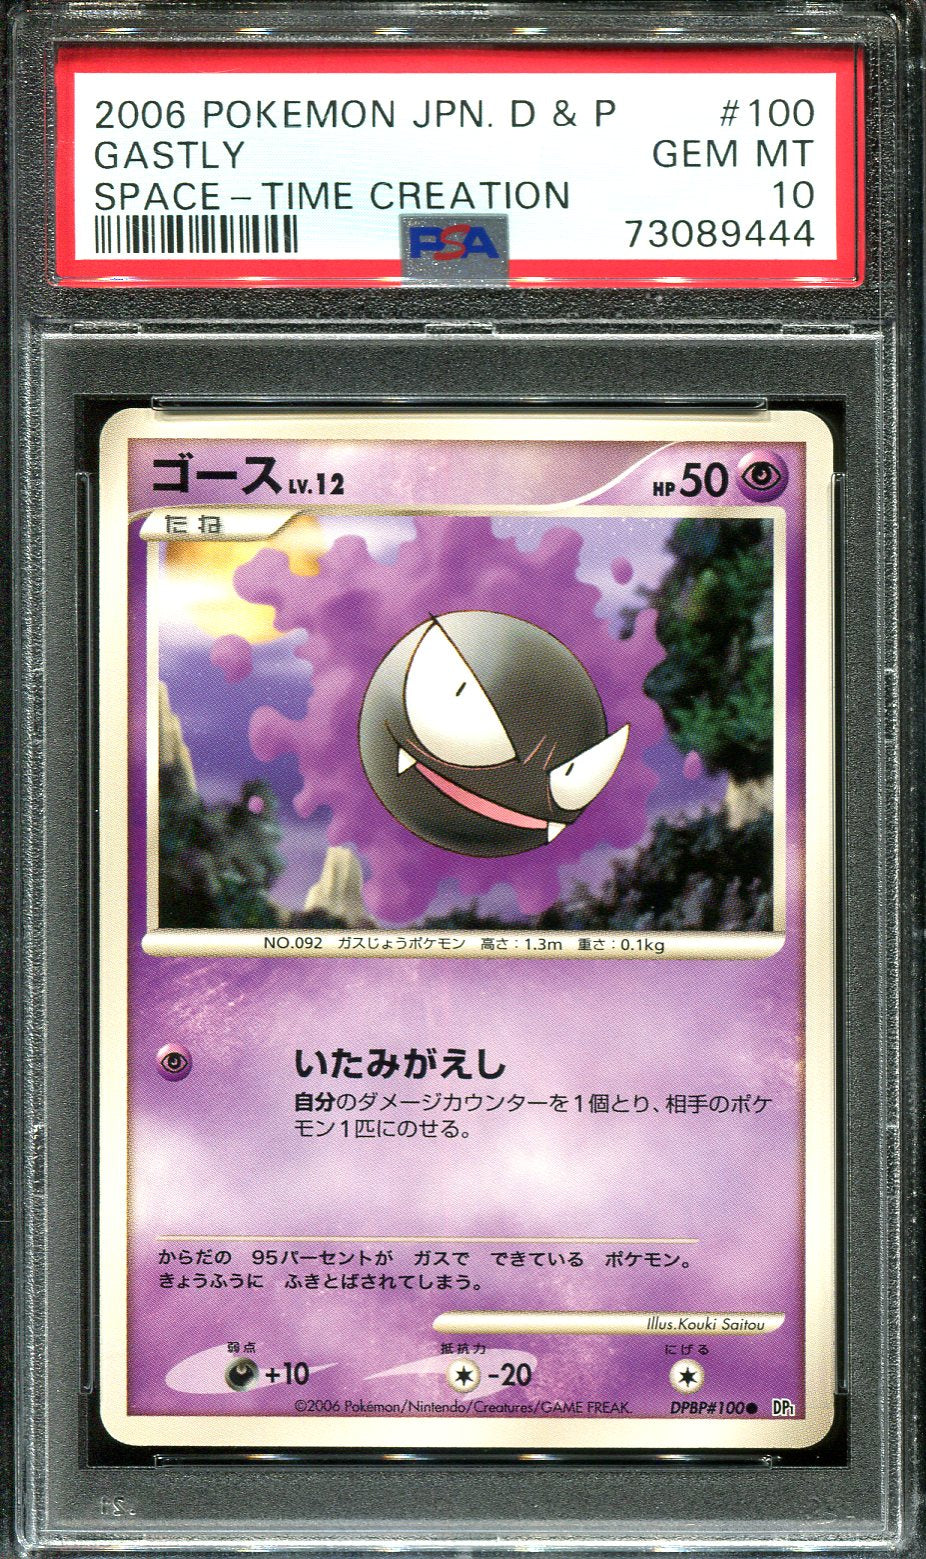 GASTLY 100 PSA 10 POKEMON SPACE TIME CREATION JAPANESE